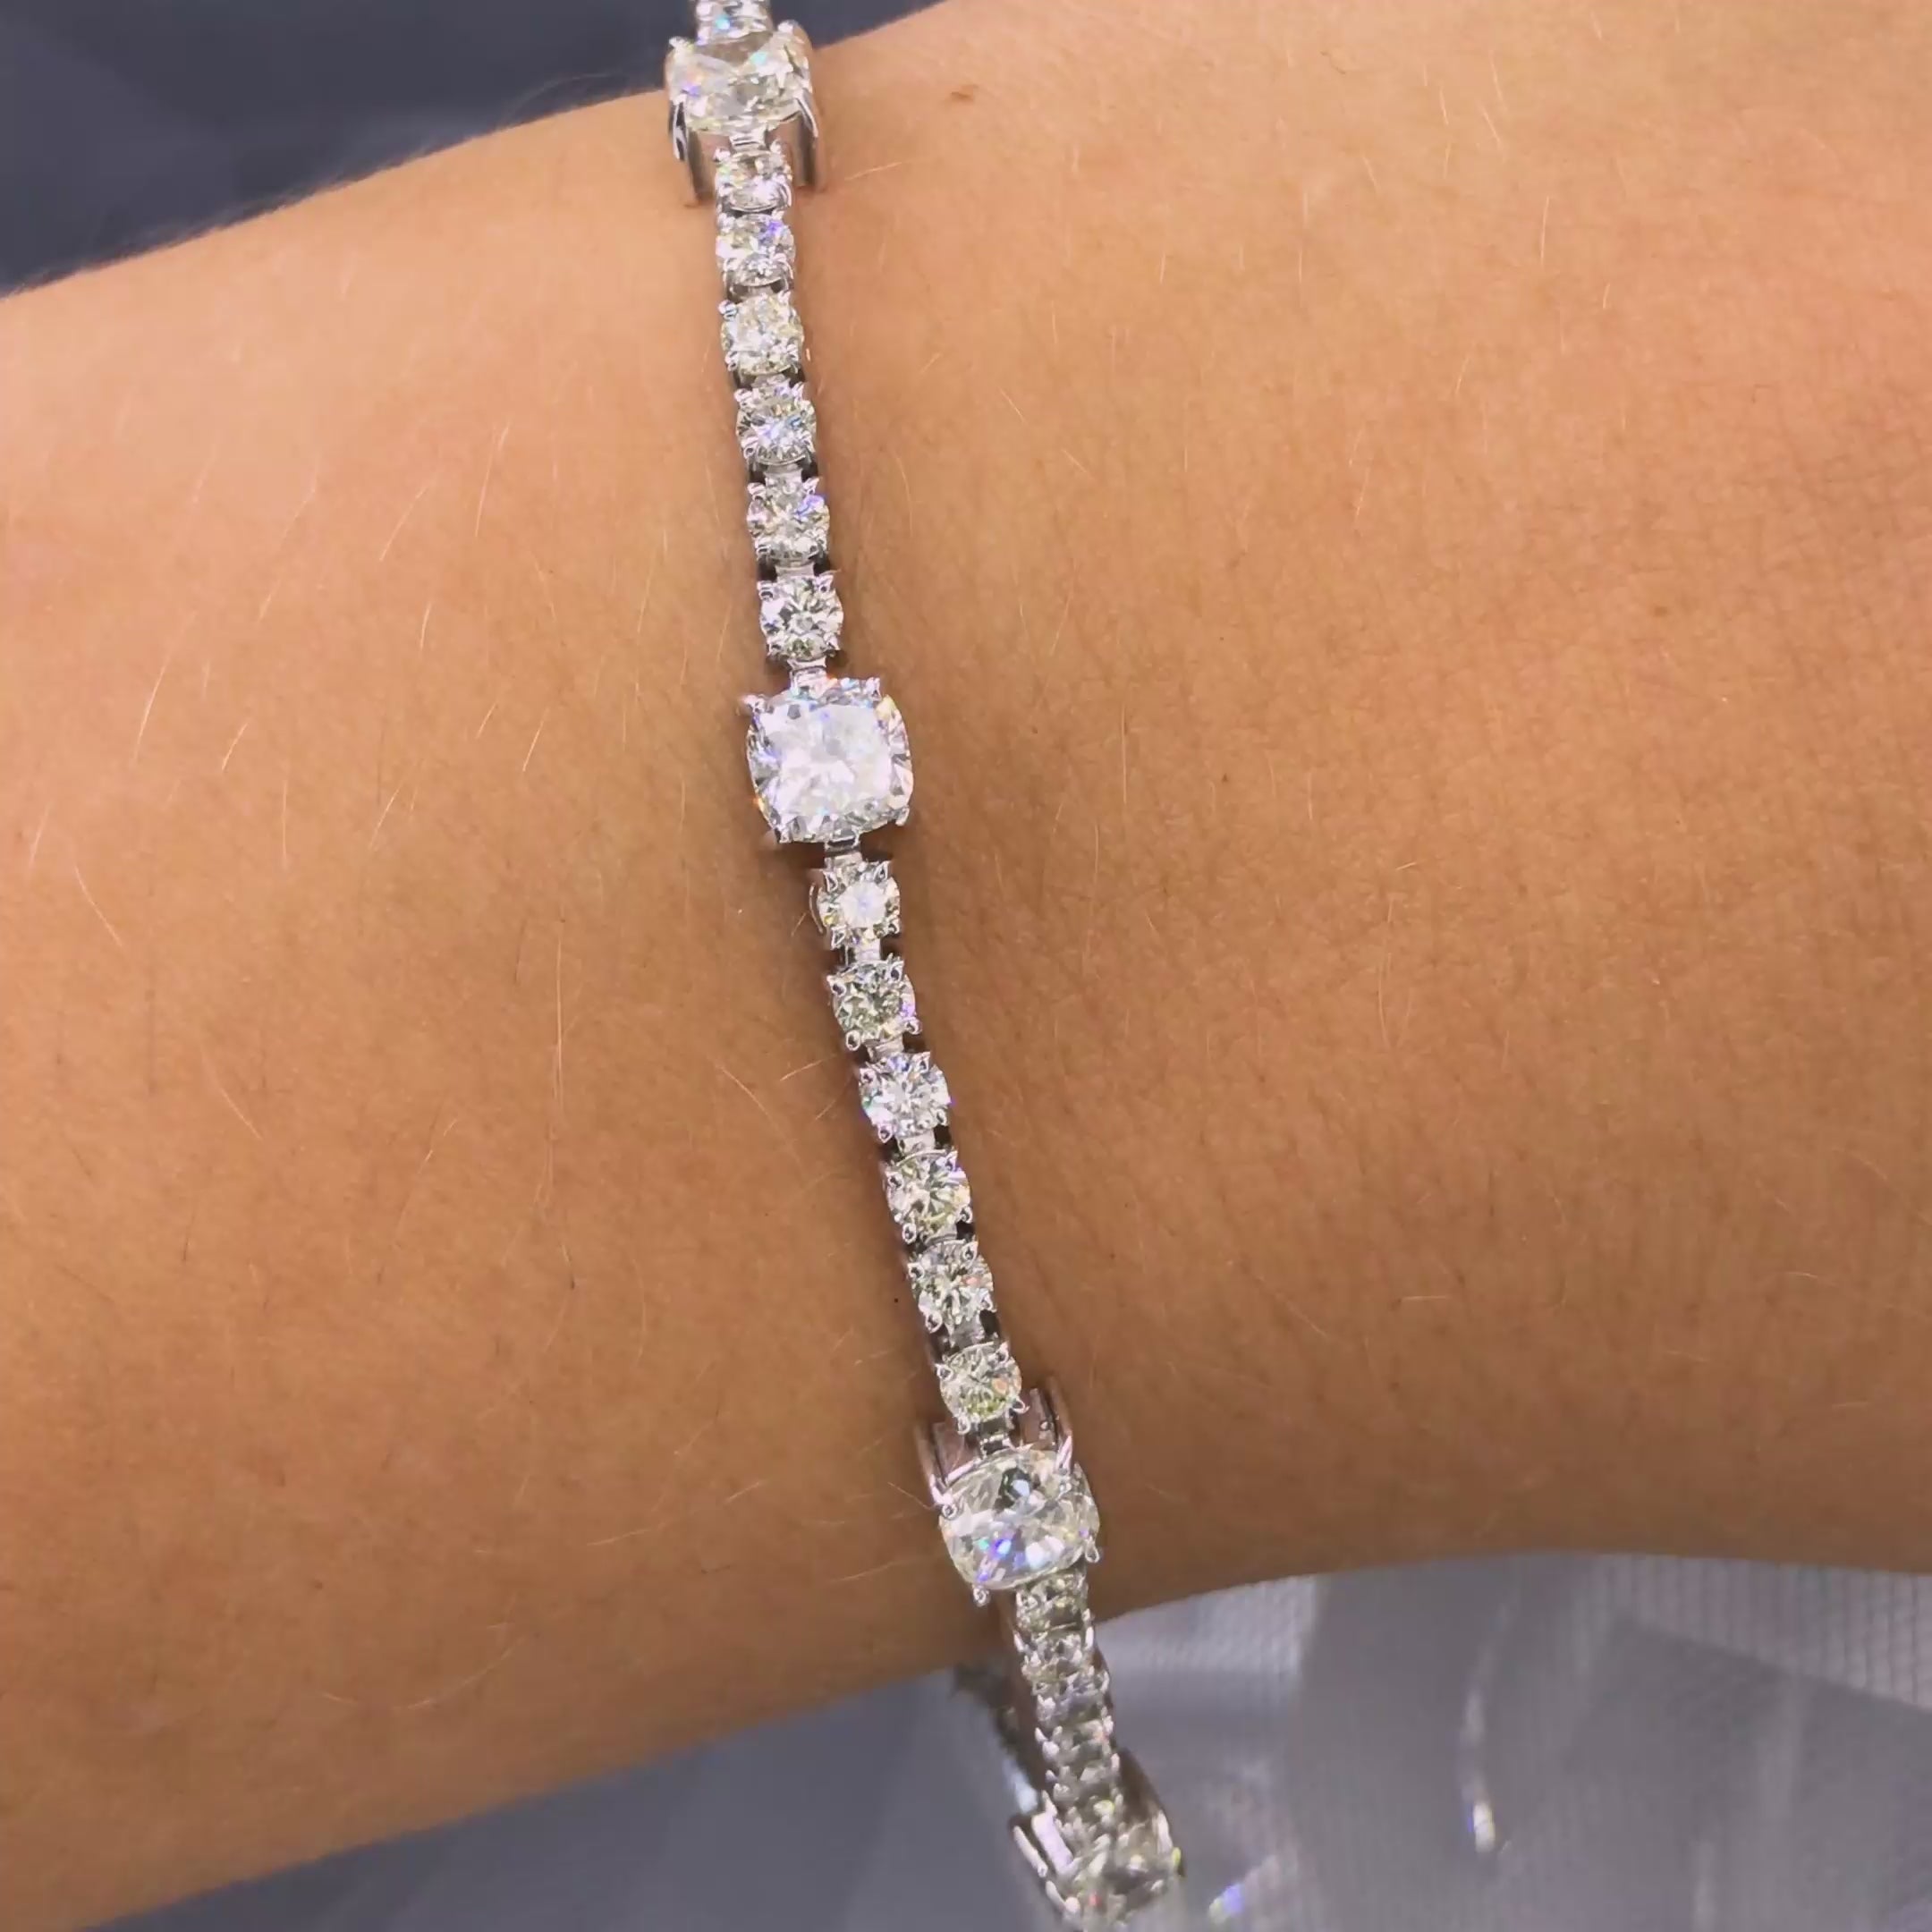 Luxurious 7.00CT Cushion and Round Cut Diamond Tennis Bracelet in 14KT White Gold